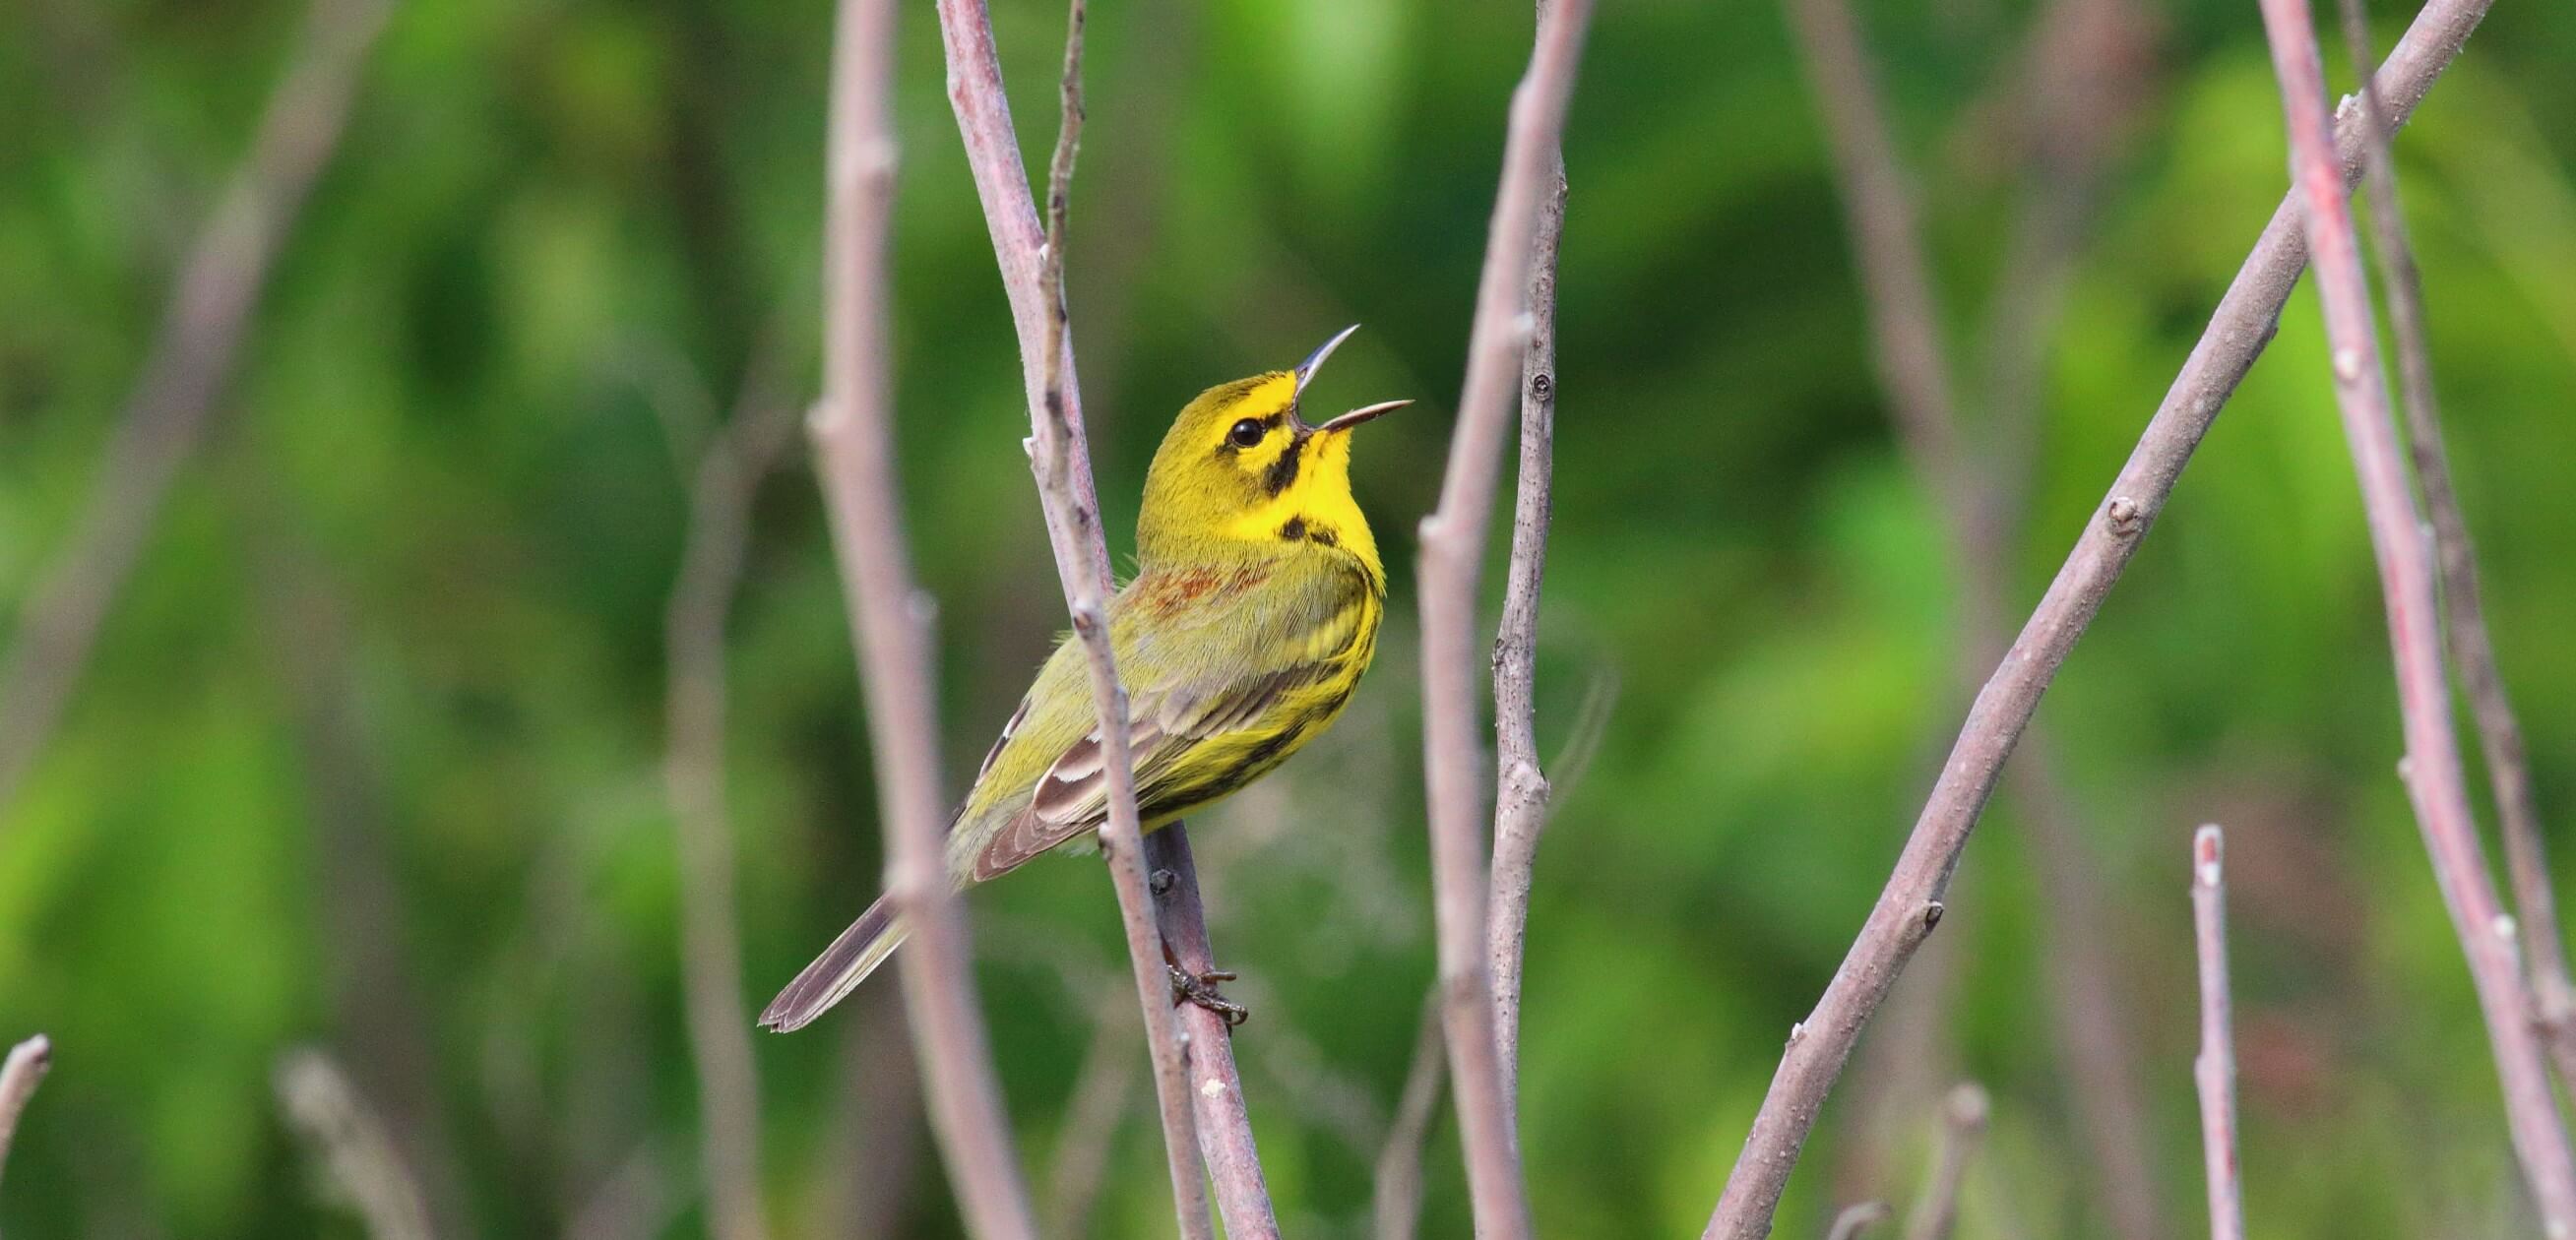 Forest management creates open woodlands favored by the Prairie Warbler. Photo by Bruce Beehler